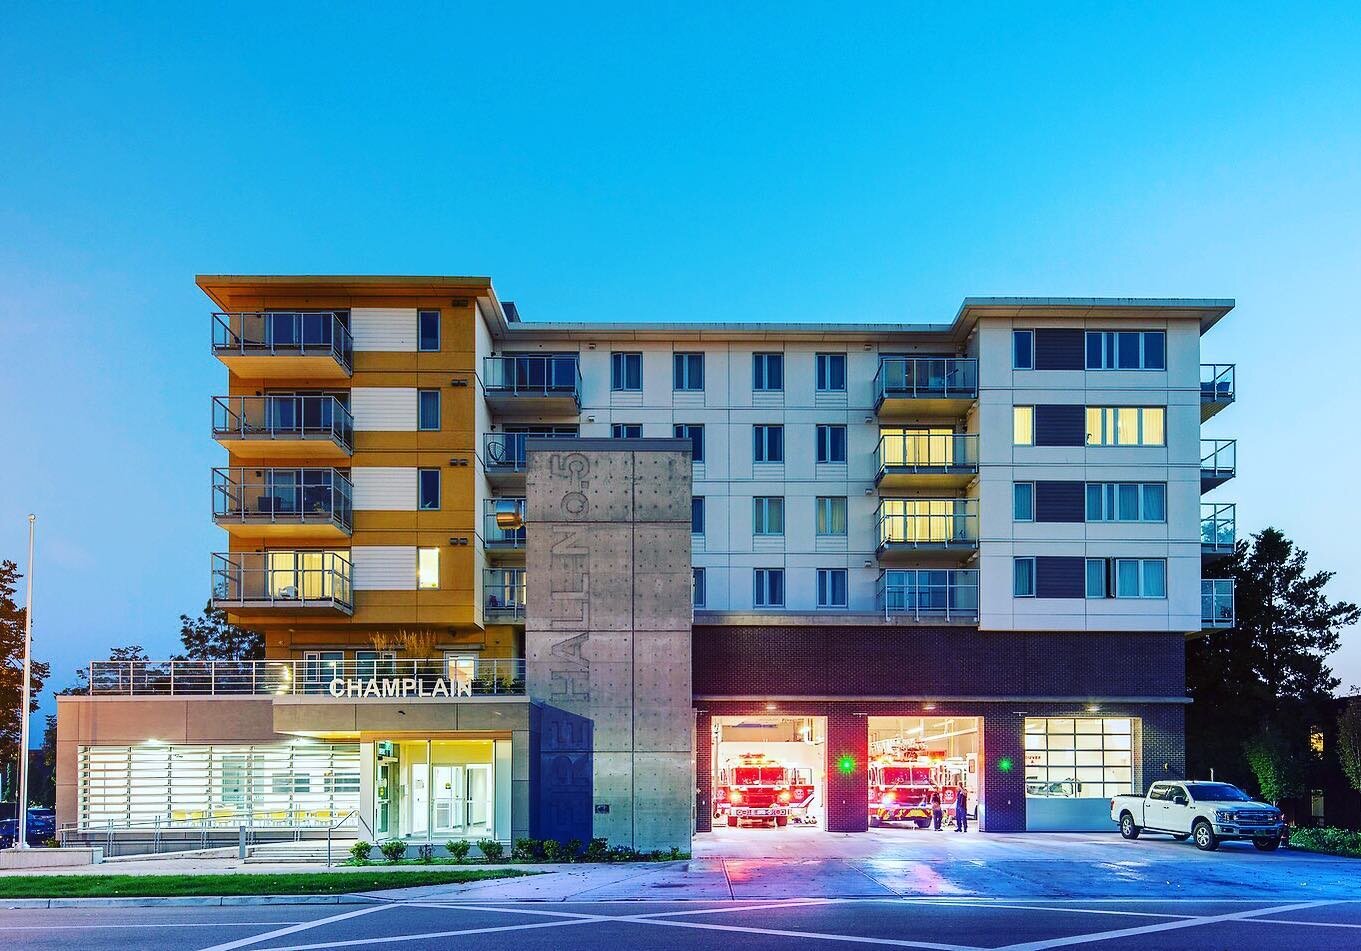 A little different. I photographed this cool firehall/apts. Located in Vancouver&rsquo;s Killarney neighbourhood, Vancouver Fire Hall No. 5 is the first colocation facility of its kind in Canada, as four storeys of two- and three-bedroom homes for wo